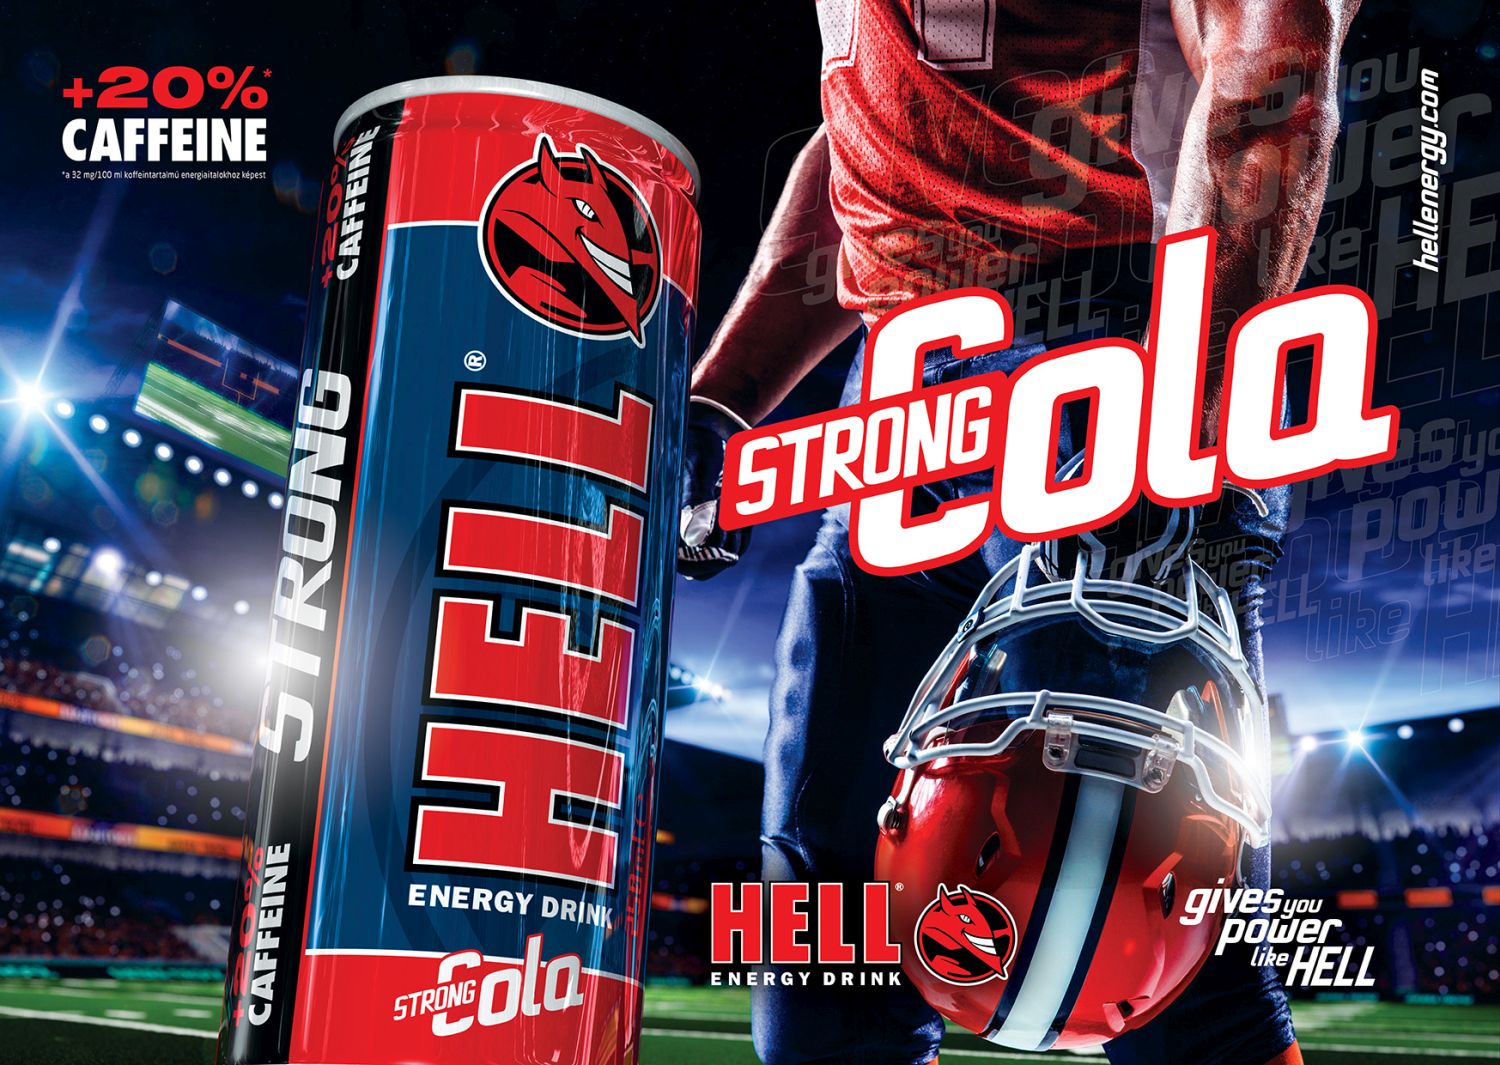 hell_strong_cola